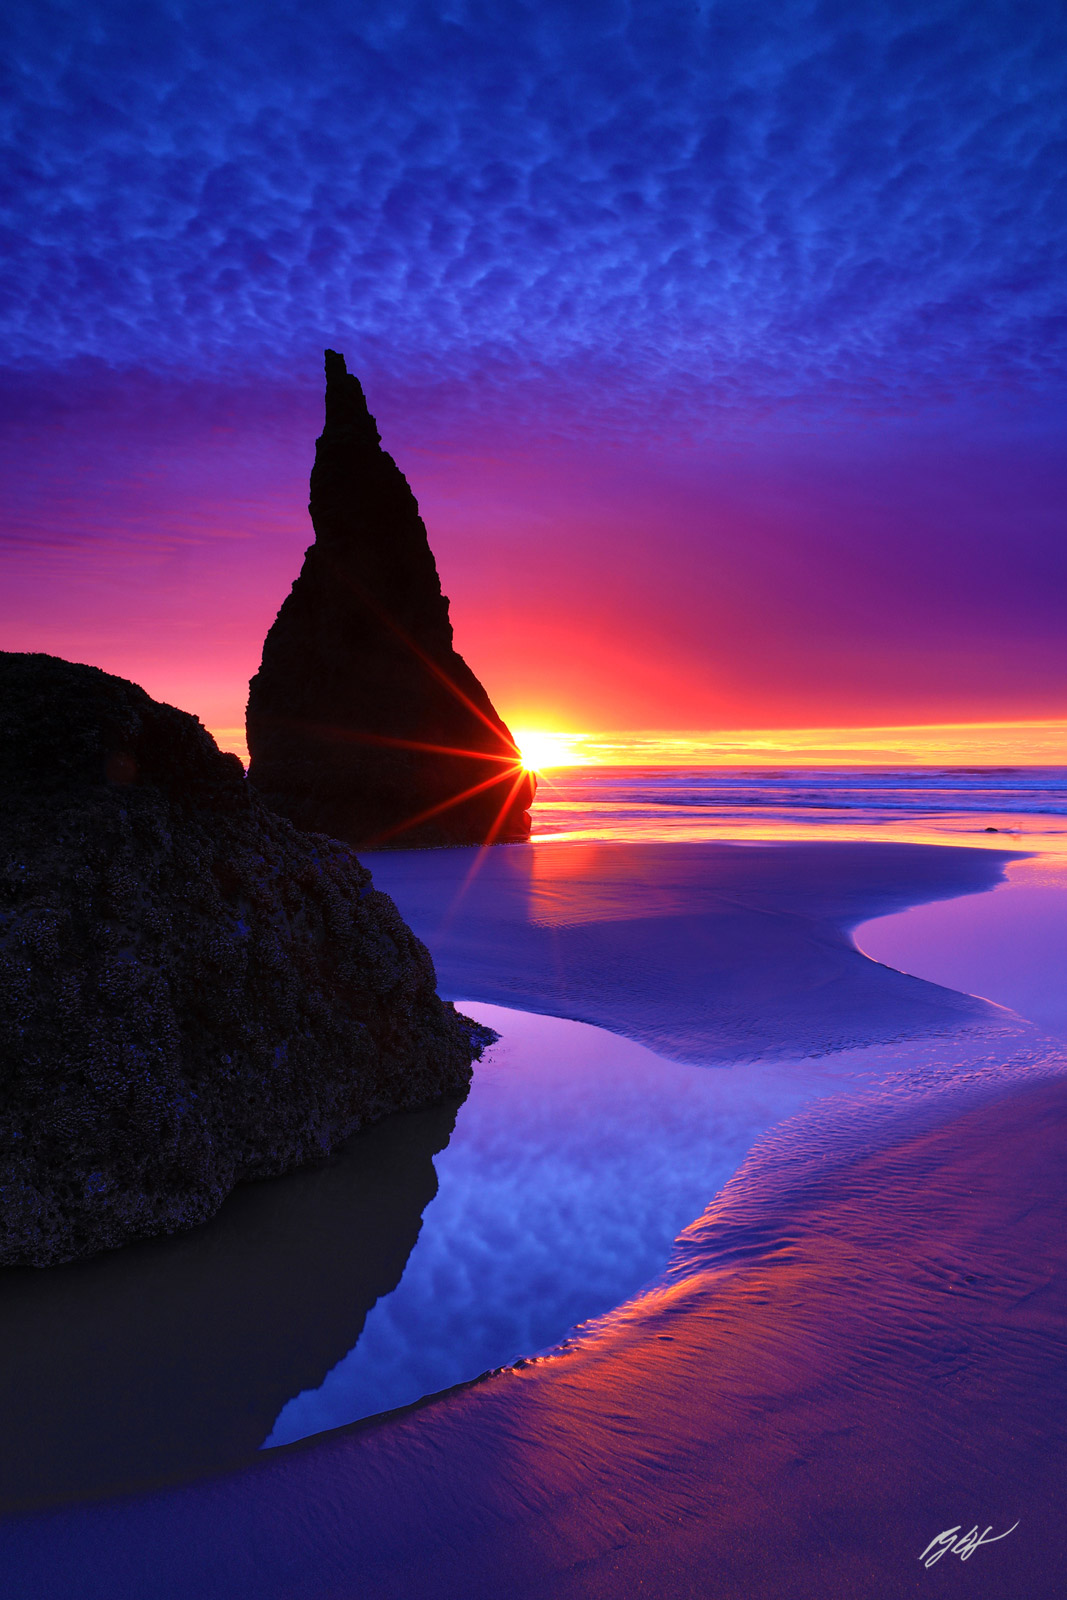 Sunset and Sunstar with the Wizards Hat from Face Rock Beach in Bandon Oregon